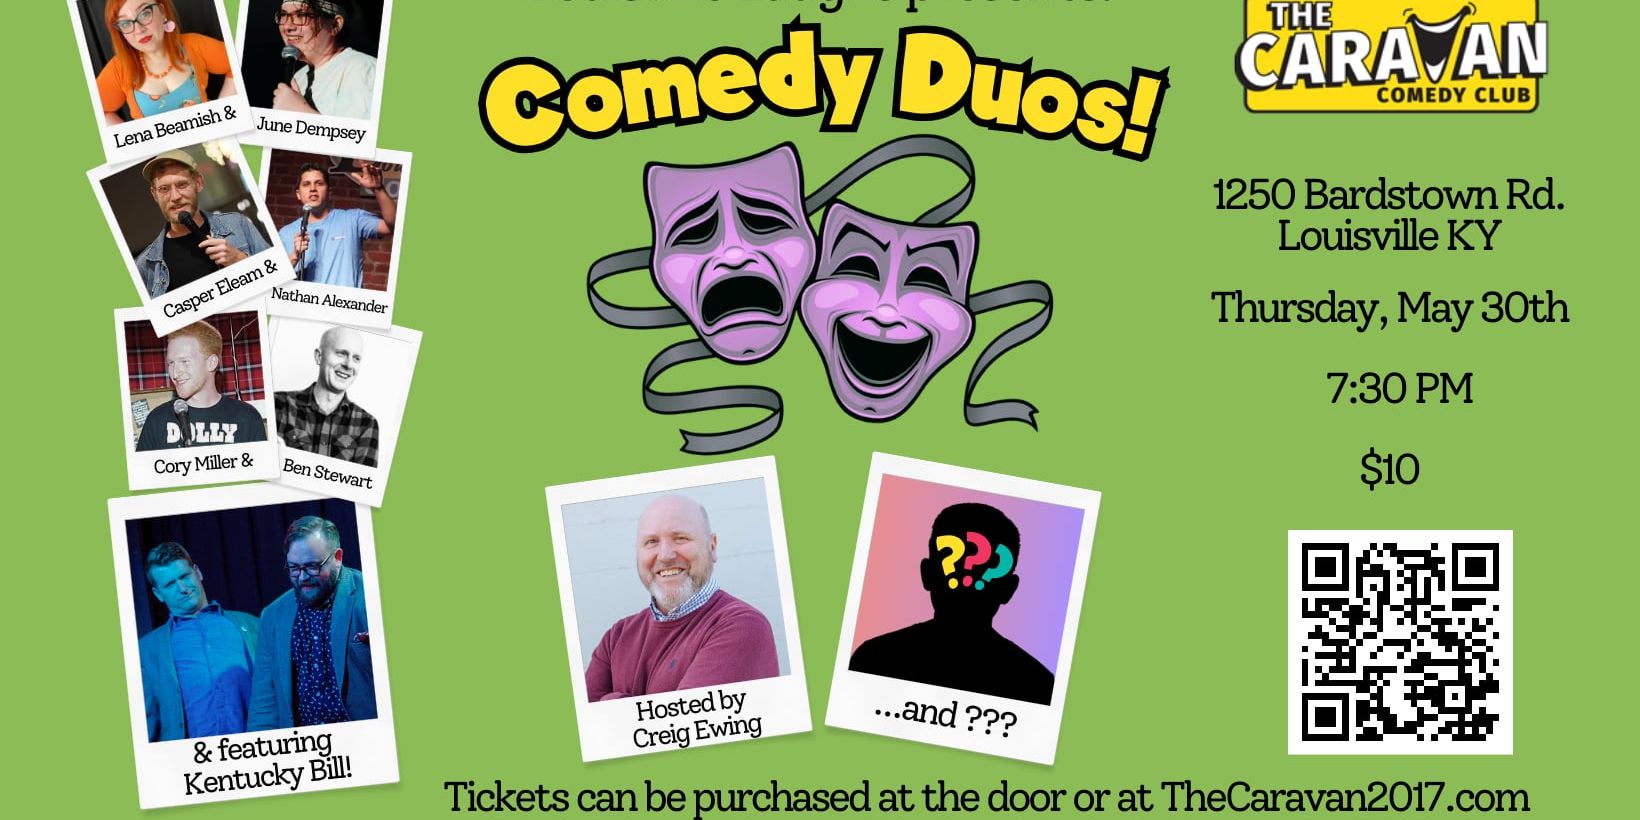 Comedy Duos promotional image